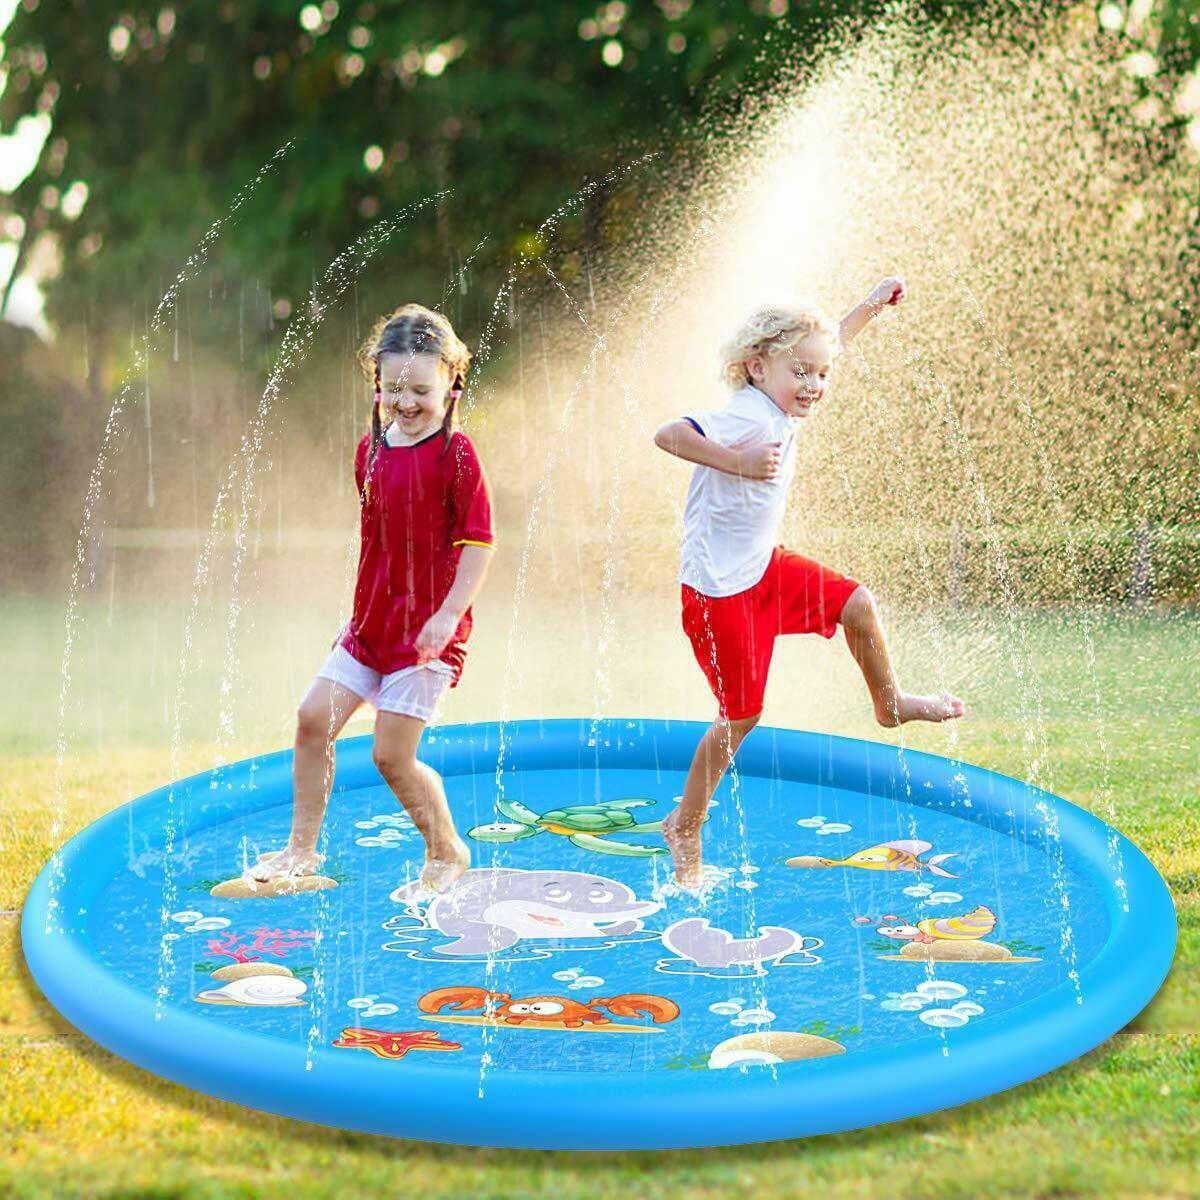 100/170cmx Children Outdoor Funny Toys Kids Inflatable Round Water Splash Play Pools Playing Sprinkler Mat Yard Water Sp Blue - 3